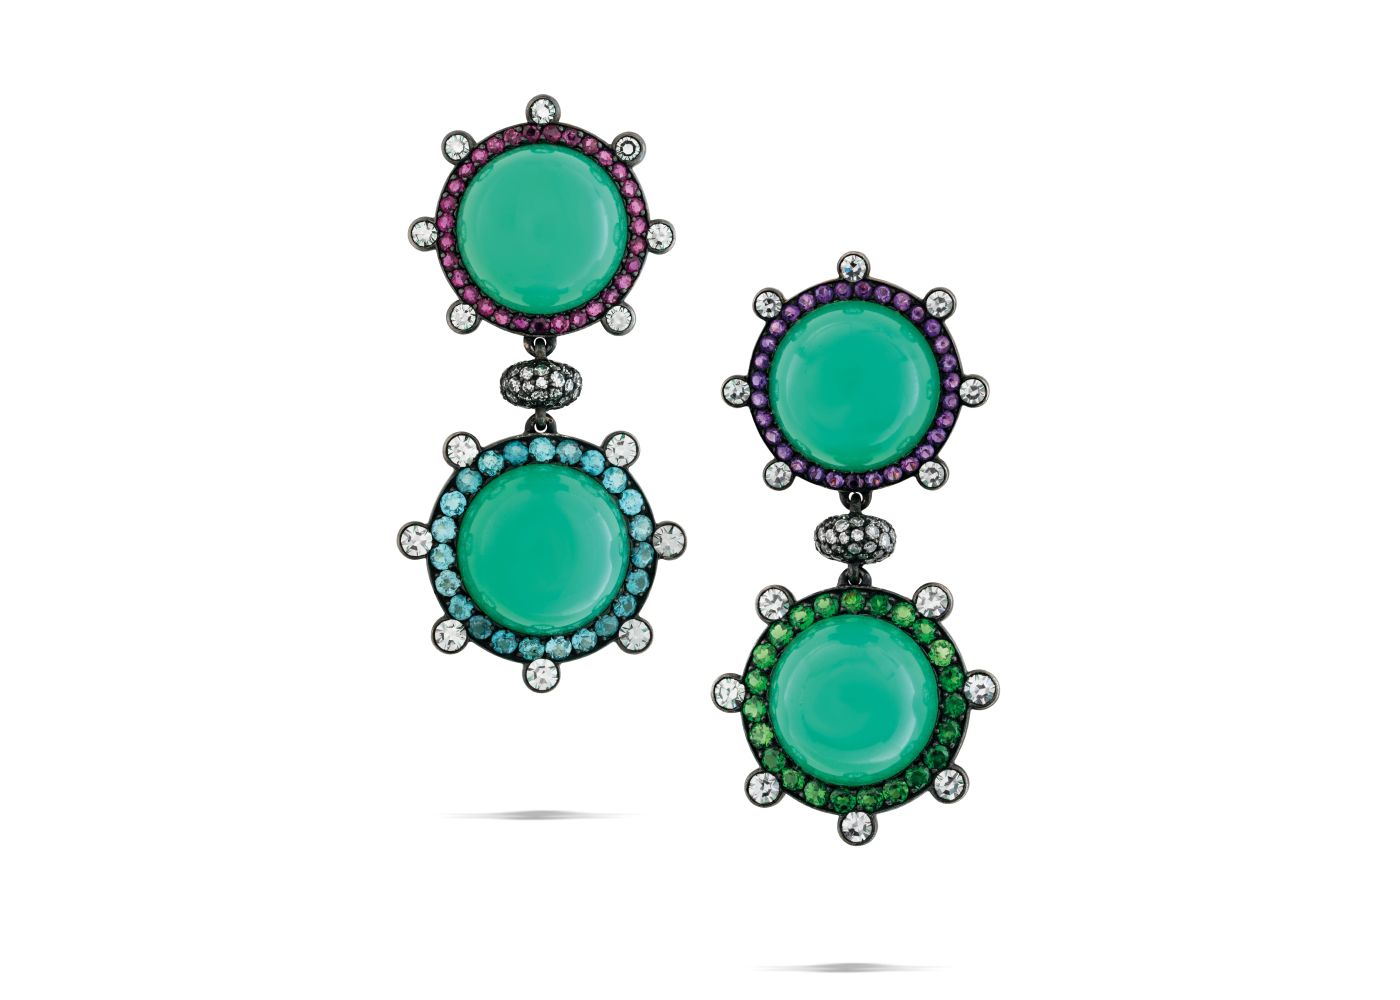 JAR earrings with round-shaped cabochon chrysoprase, round diamonds, rubies, tourmalines, amethysts and green garnets in18k yellow and white gold and silver, due to be sold at the Christie’s Magnificent Jewels auction on 17 May 2023